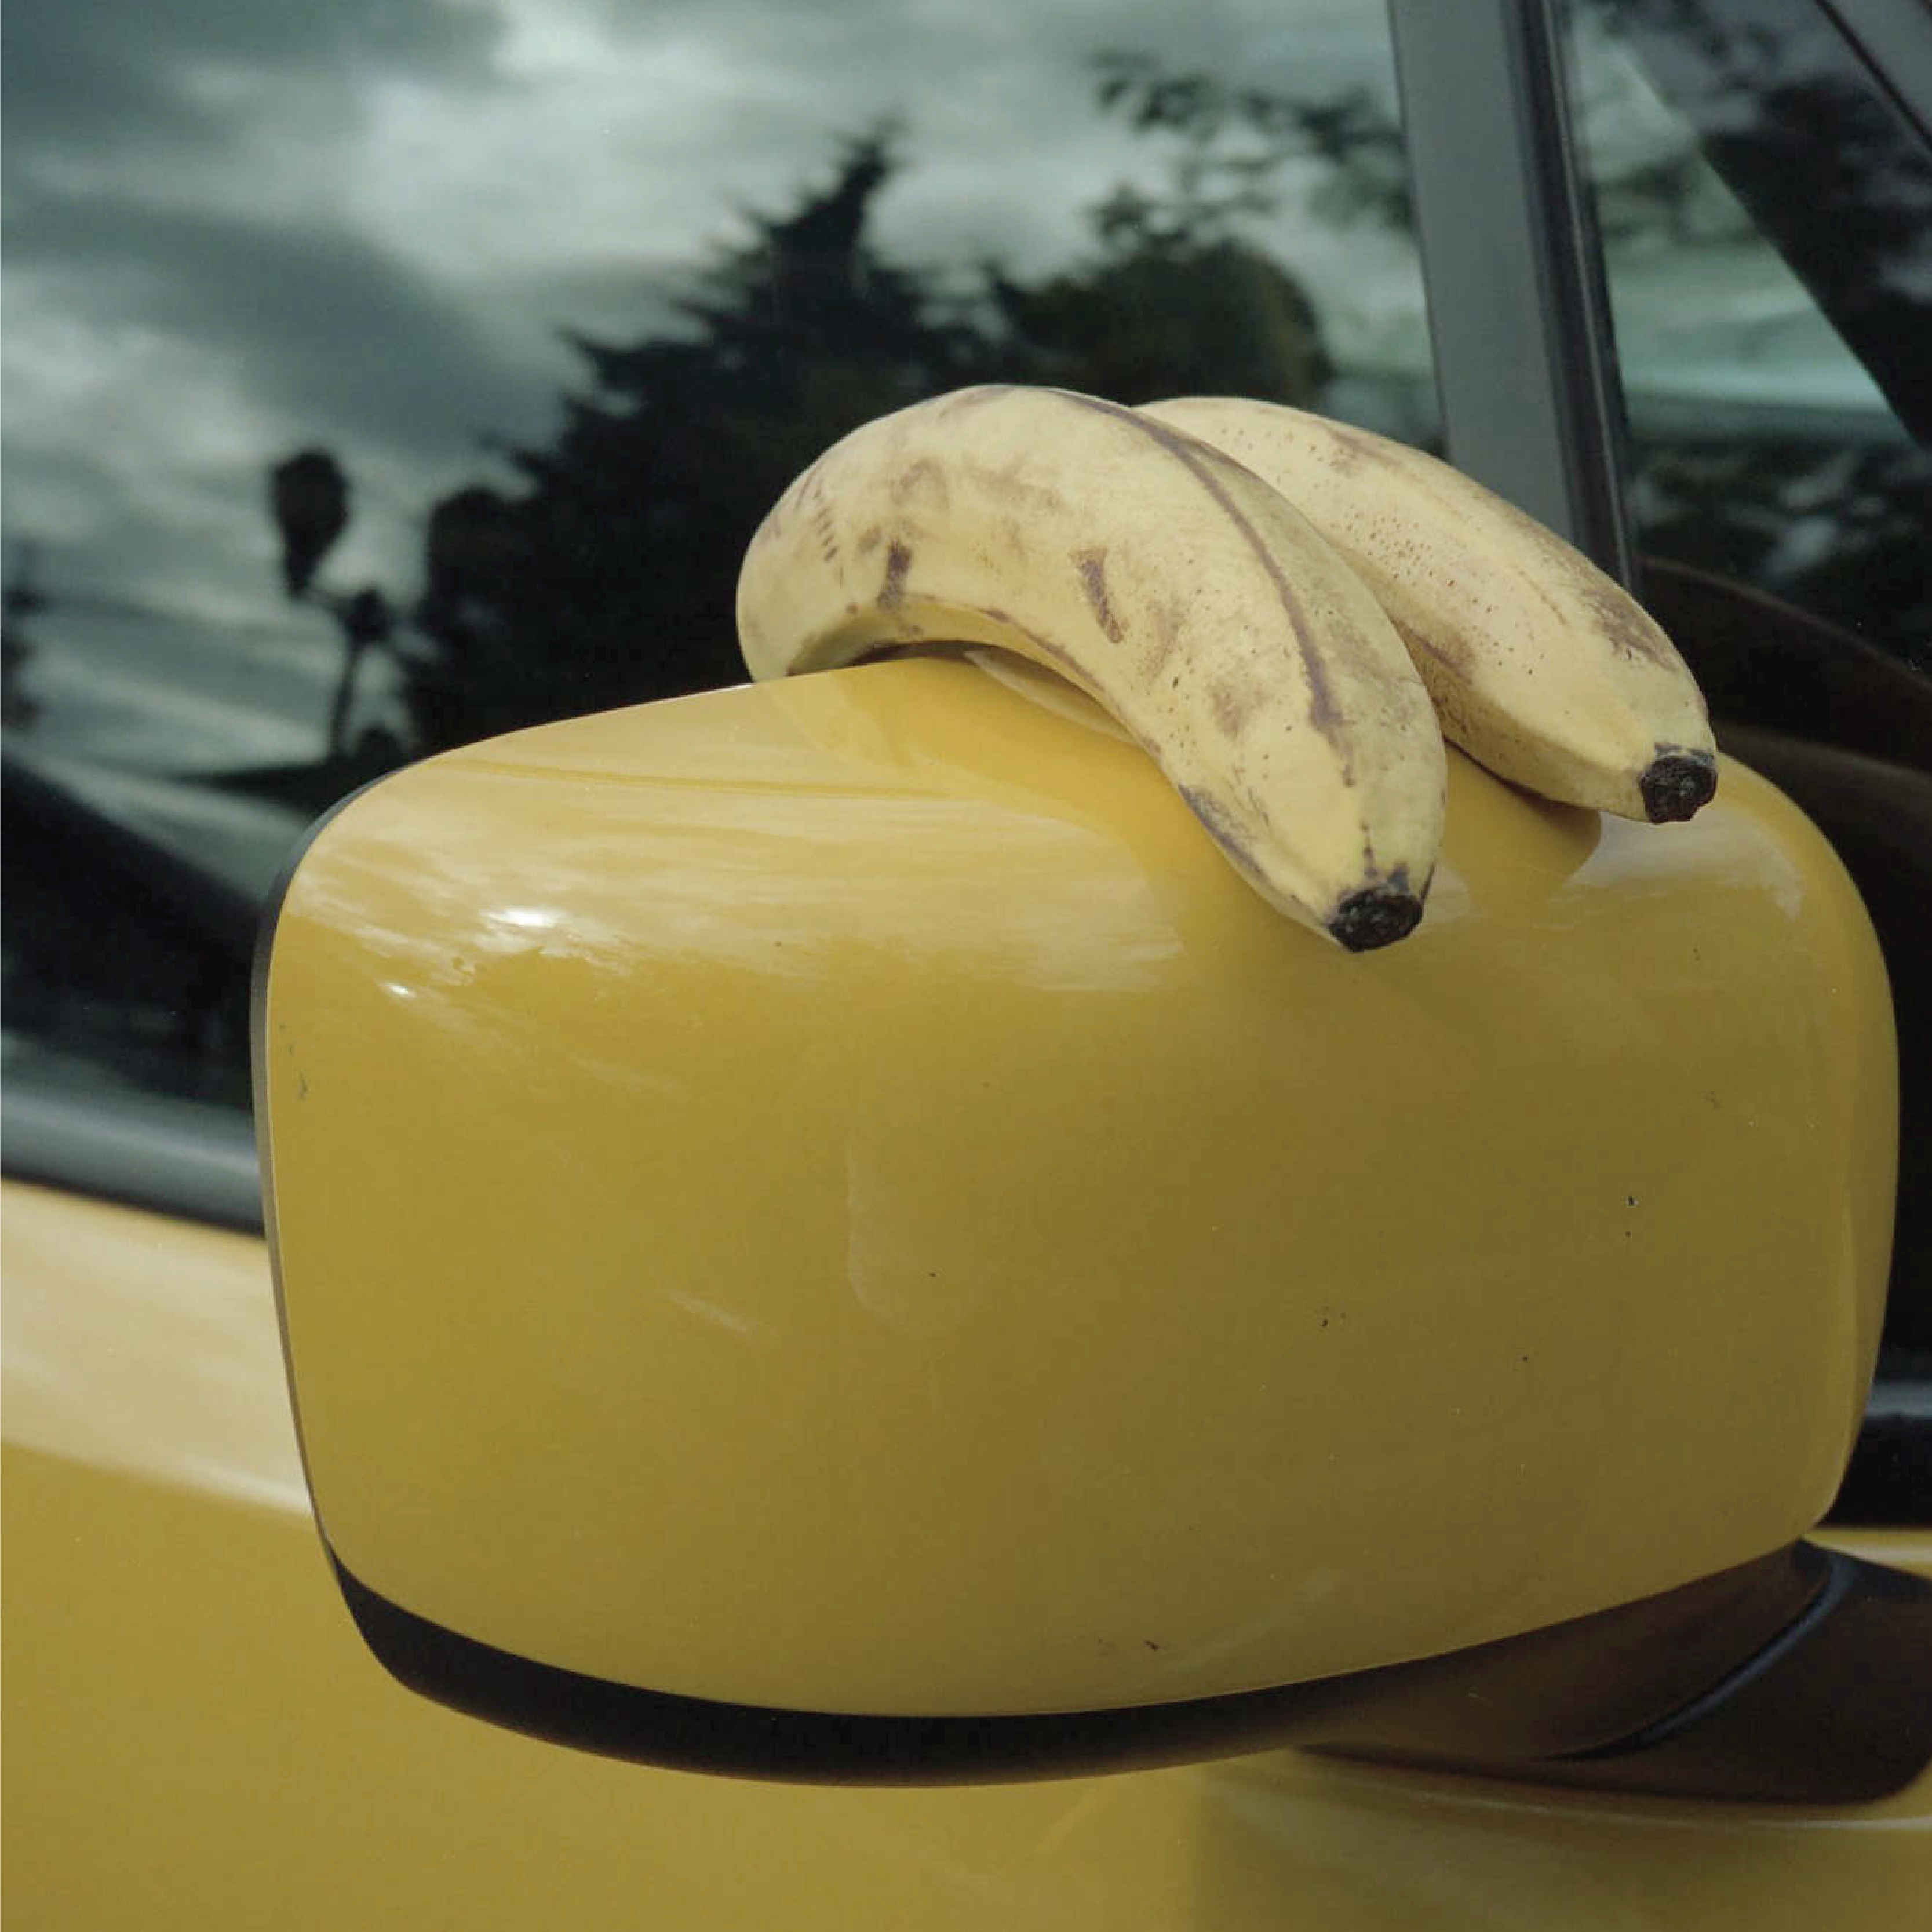 Bananas resting on a yellow car mirror, example of student photography